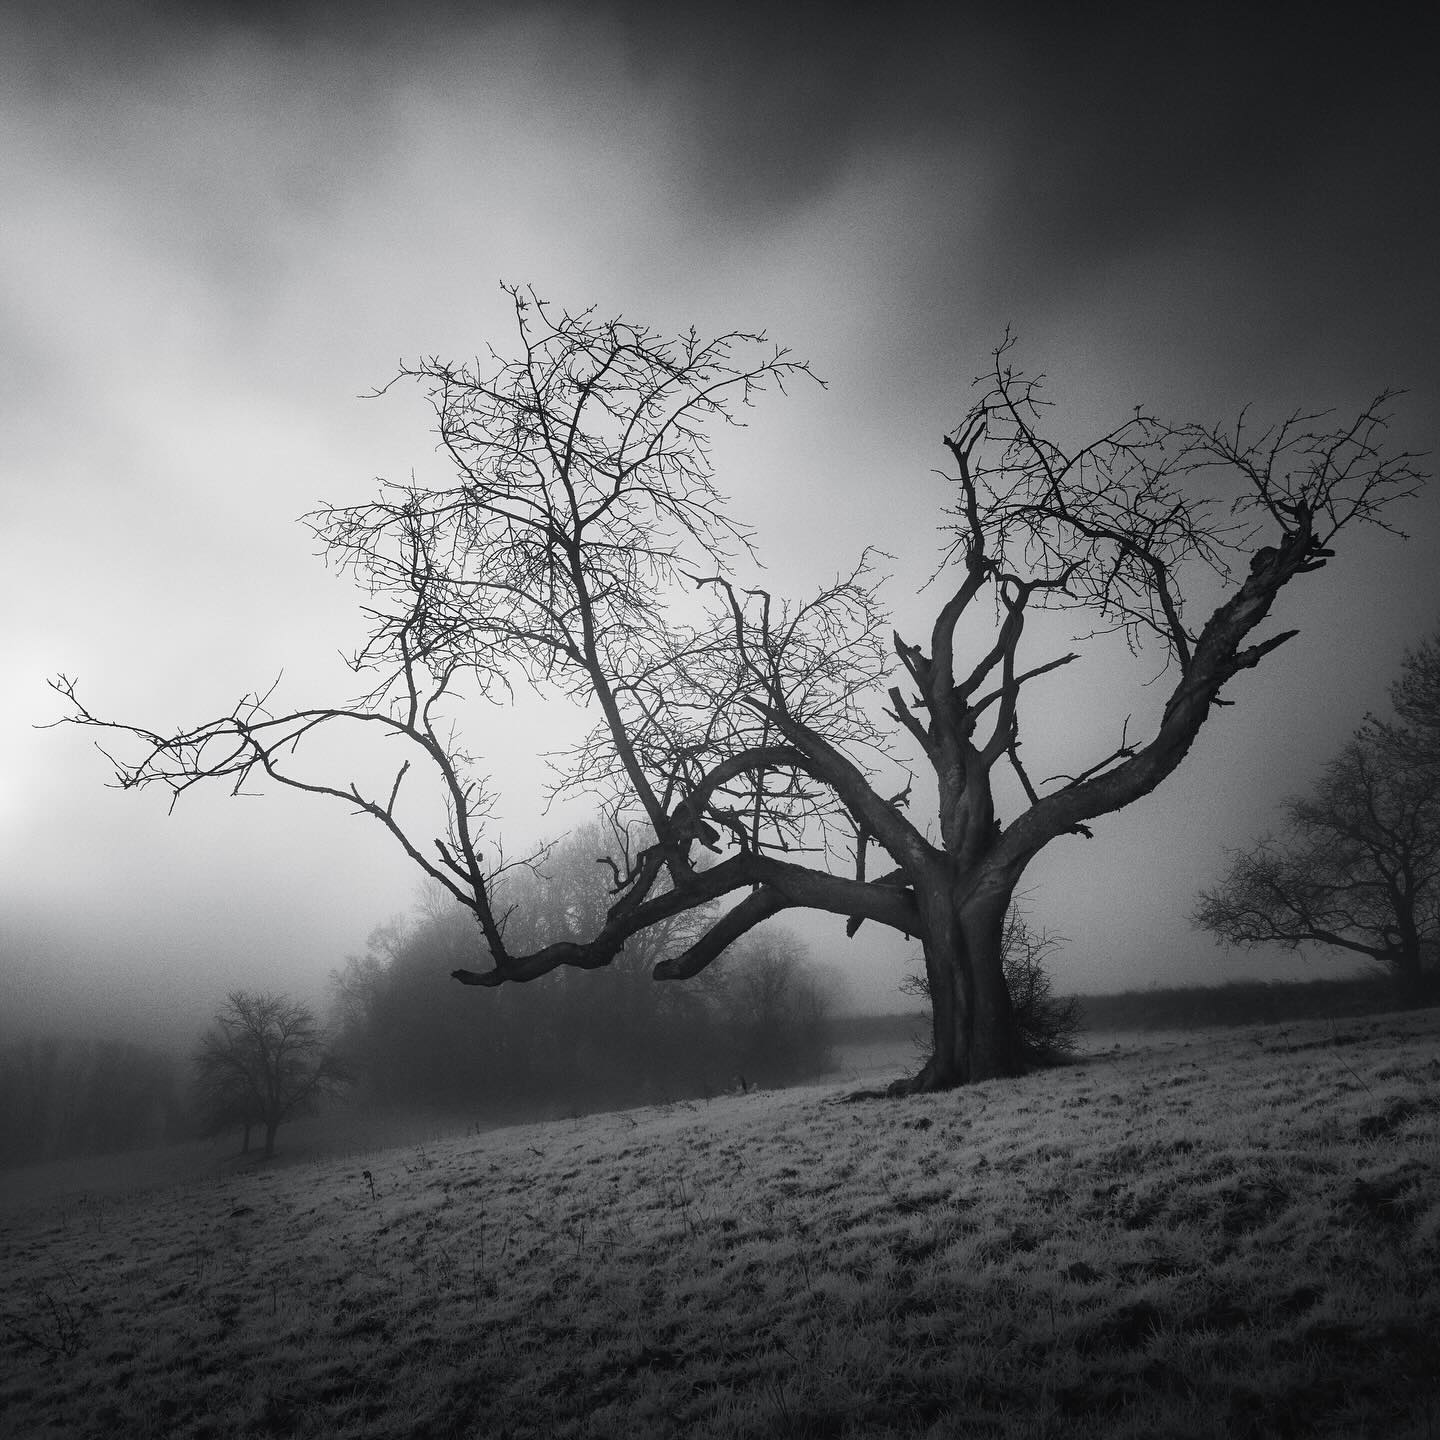 D 4 R K  M 3 5 5 3 N 6 3 4

An otherworldly tree capture in a deep fog. The strangeness of its silhouette is enhanced by